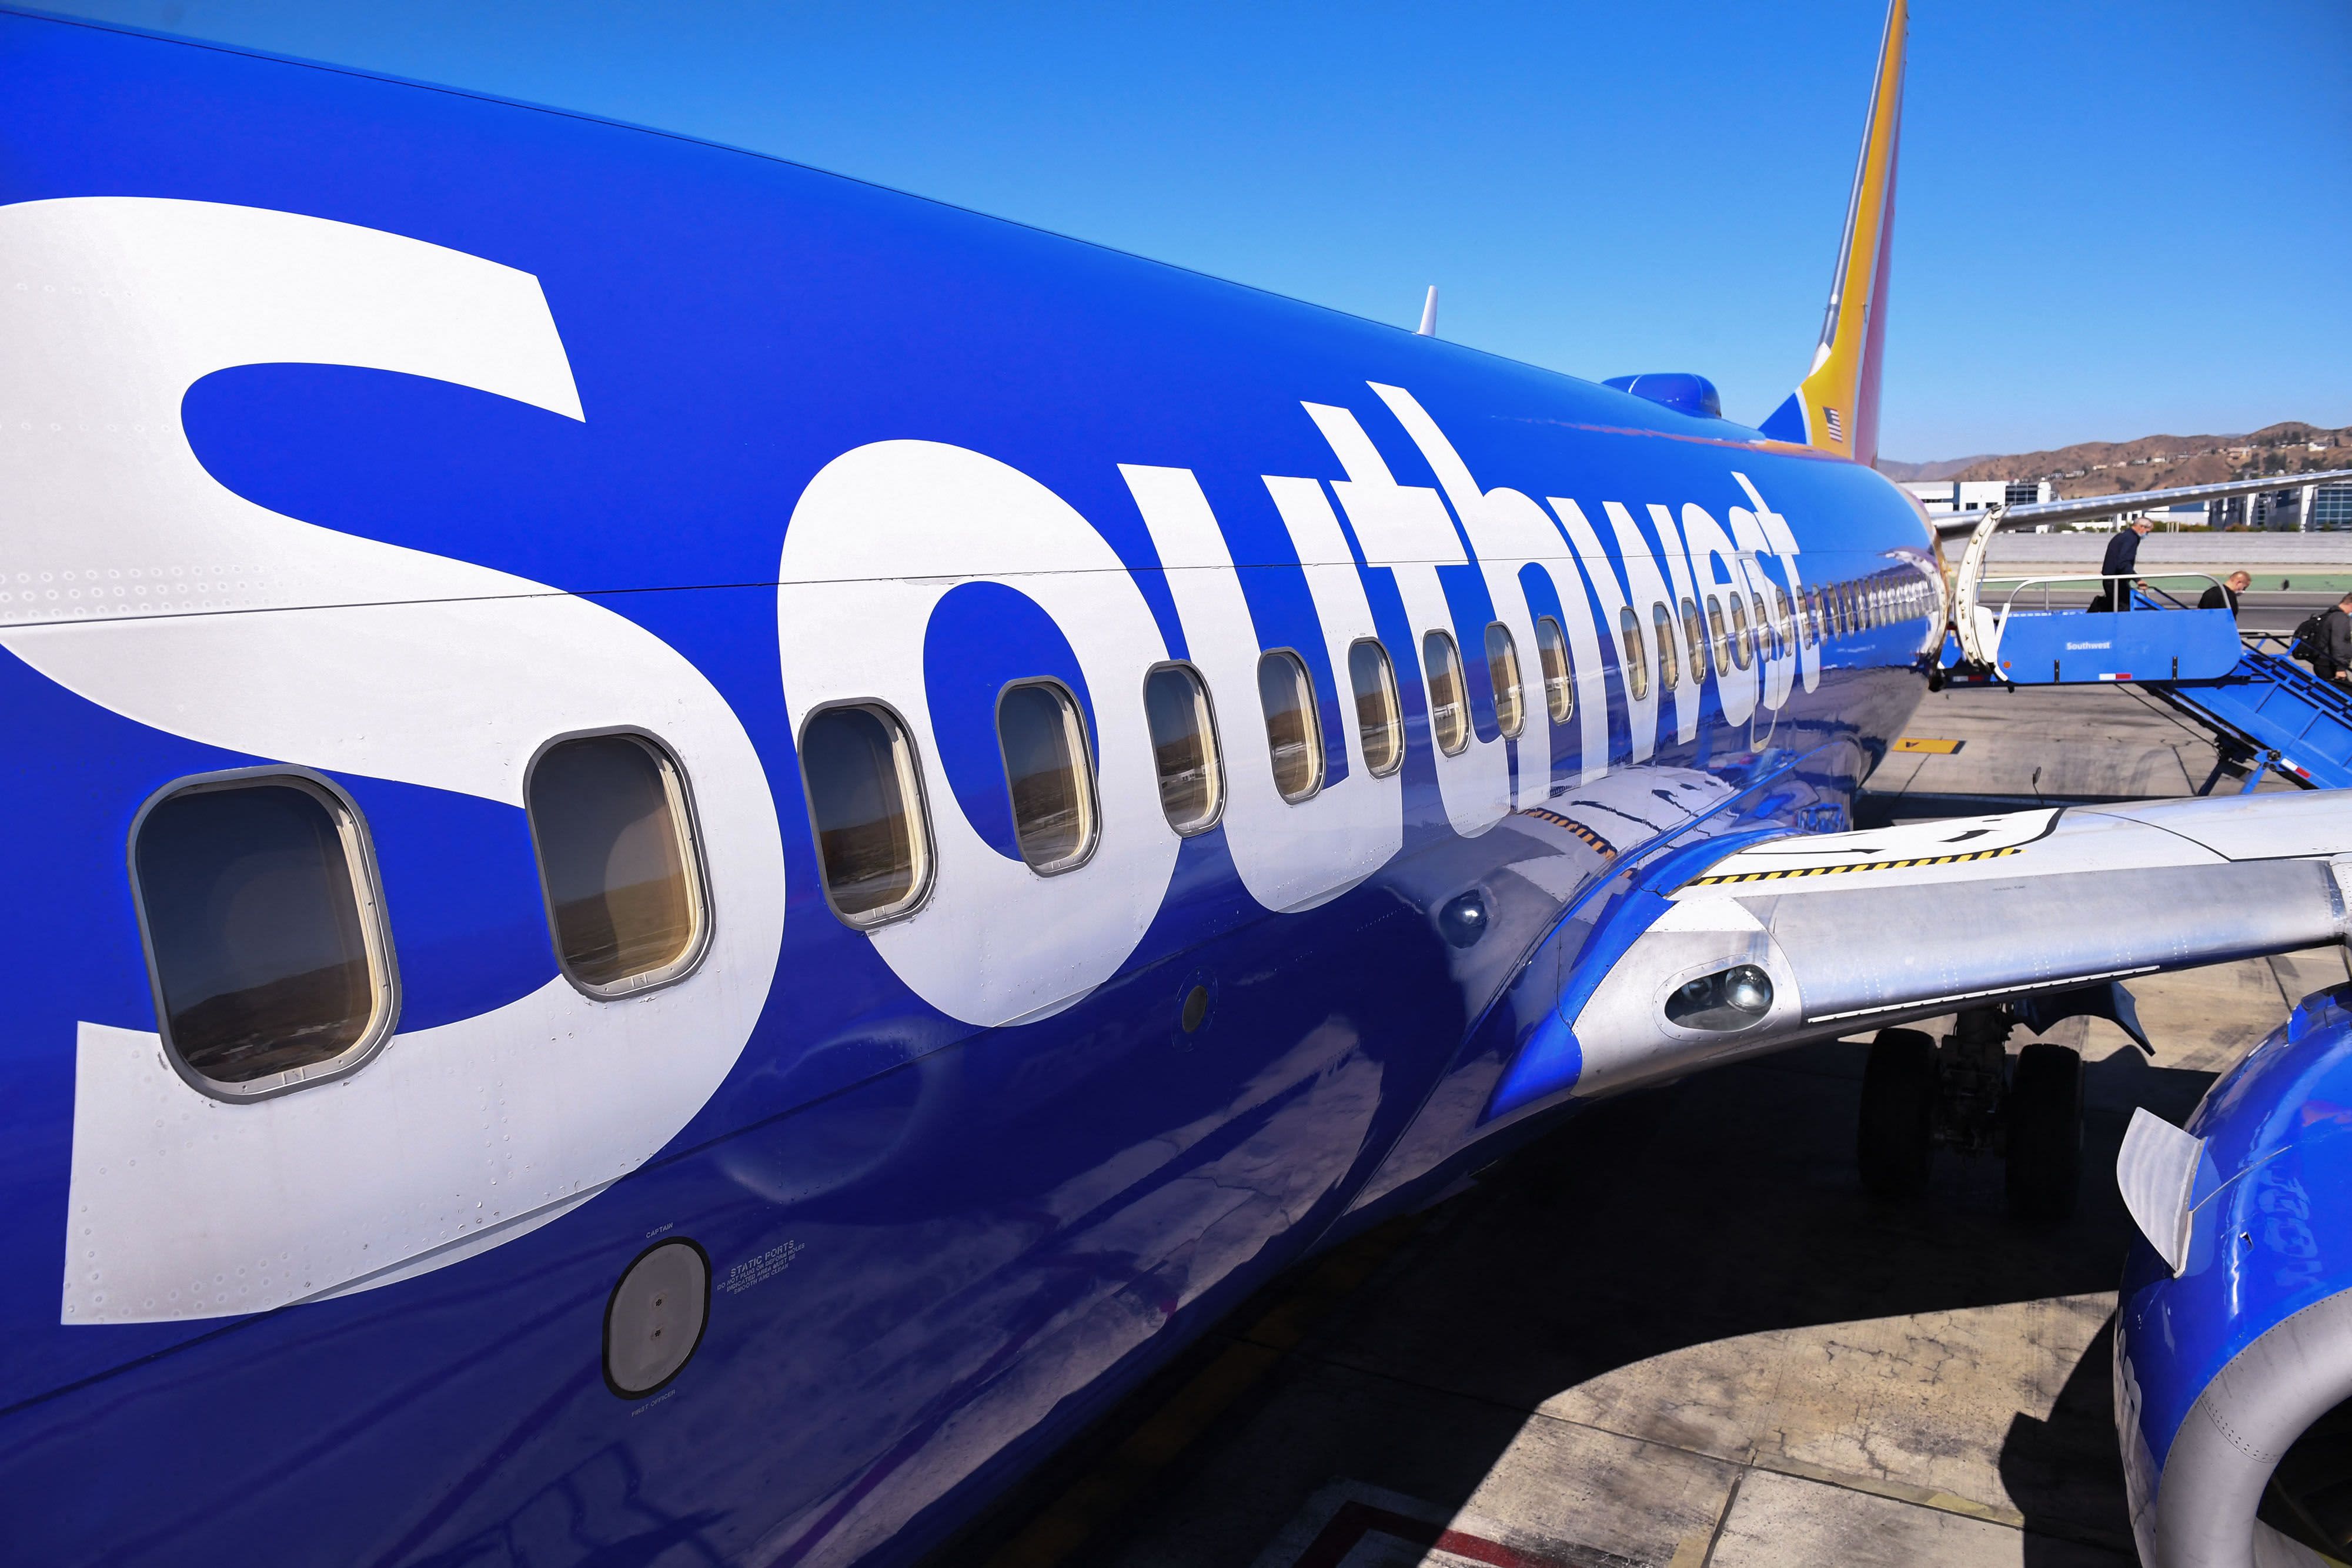 Passengers deplane from a Southwest Airlines flight from Las Vegas at Hollywood Burbank Airport in Burbank, California, Oct. 10, 2021. Southwest Airlines canceled more than 1,000 flights Sunday, as part of a major weekend service disruption that the carri